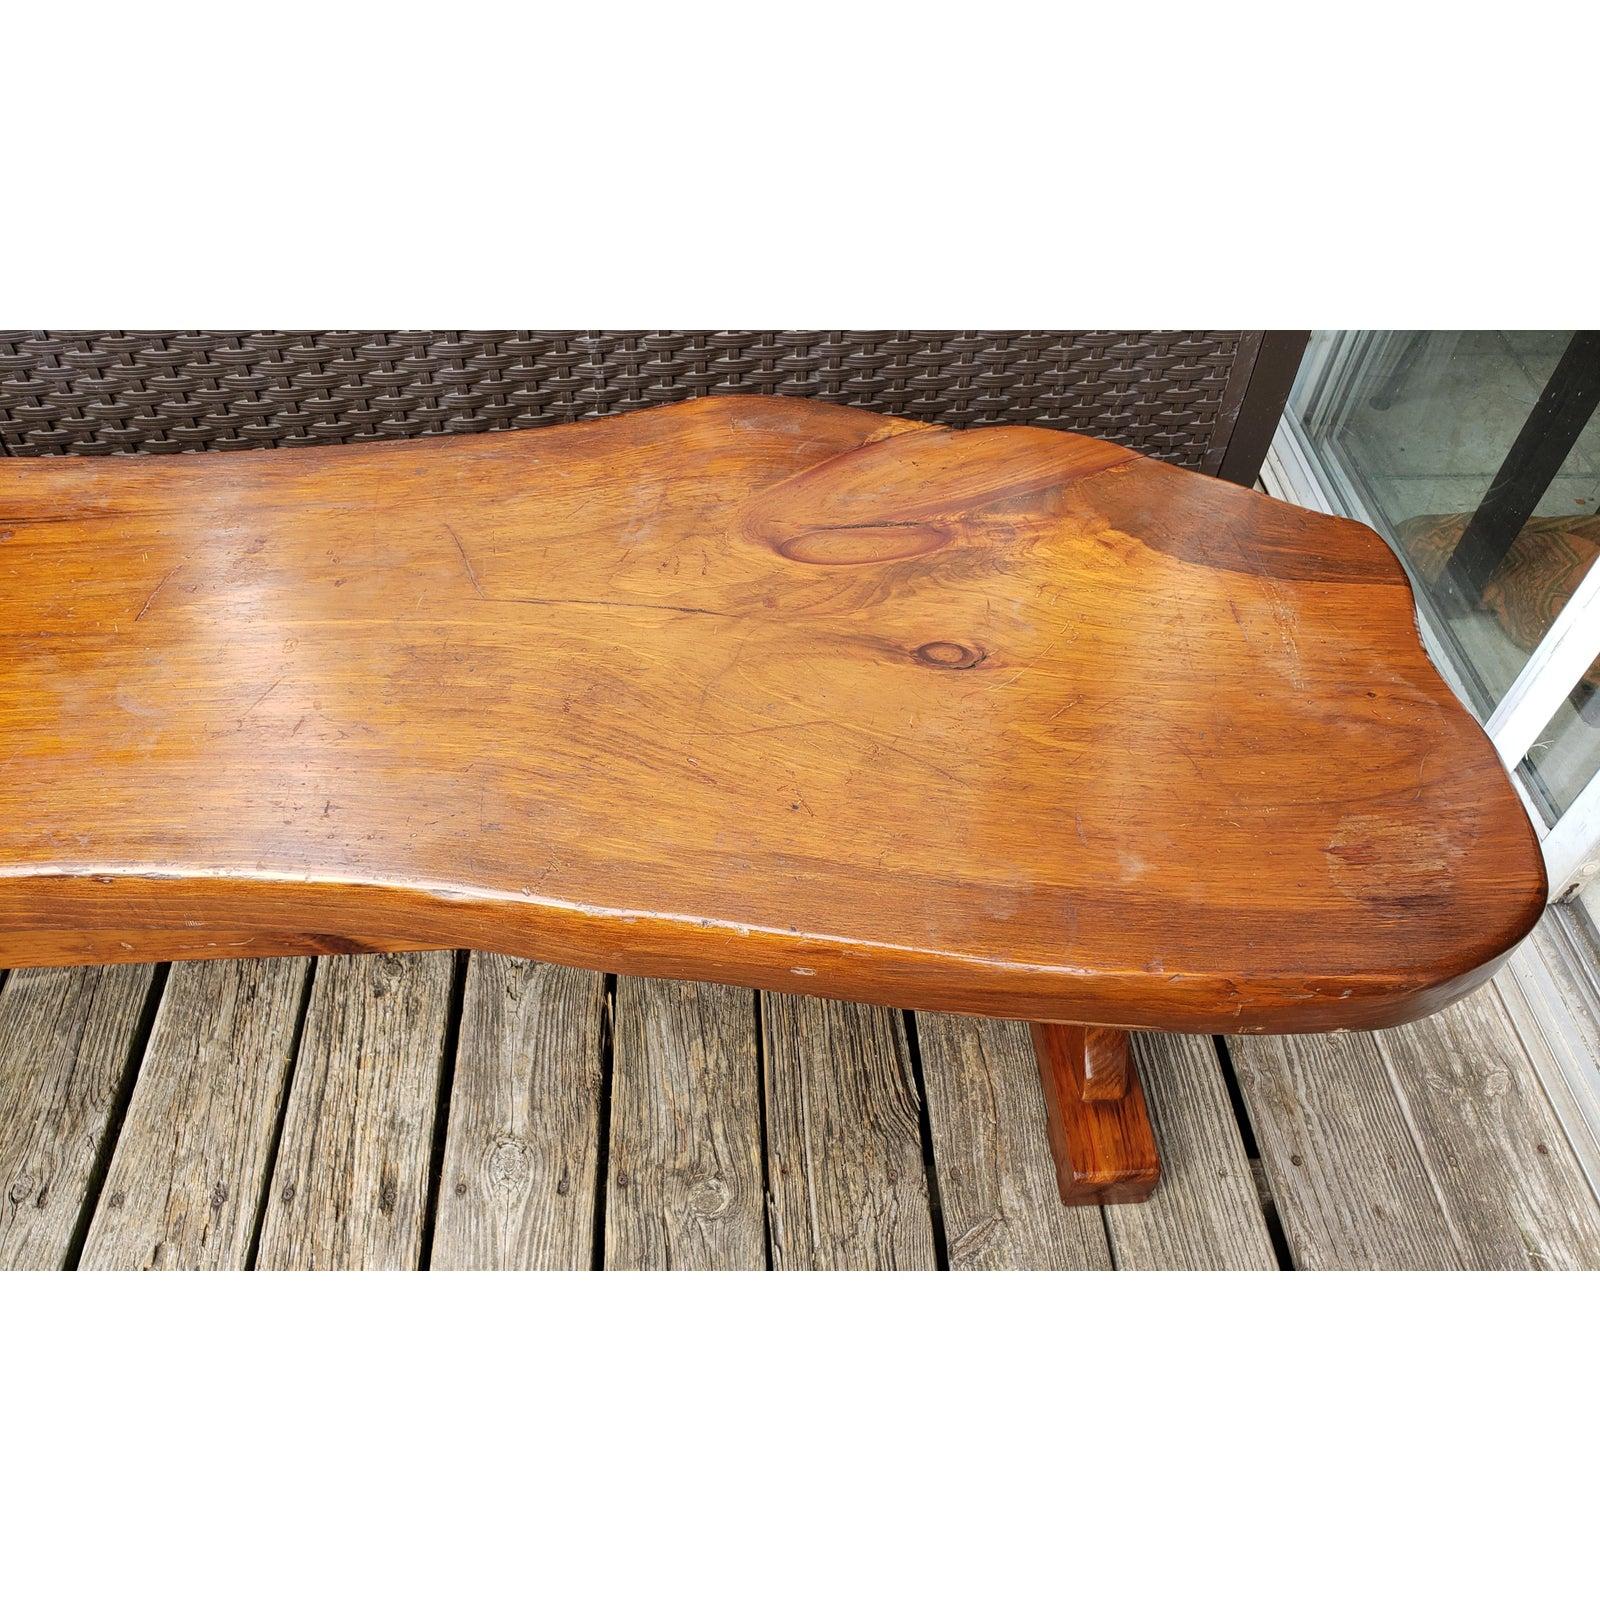 1980s Handcrafted Polished Walnut Pine Wood Slabs Trestle Coffee Table For Sale 2